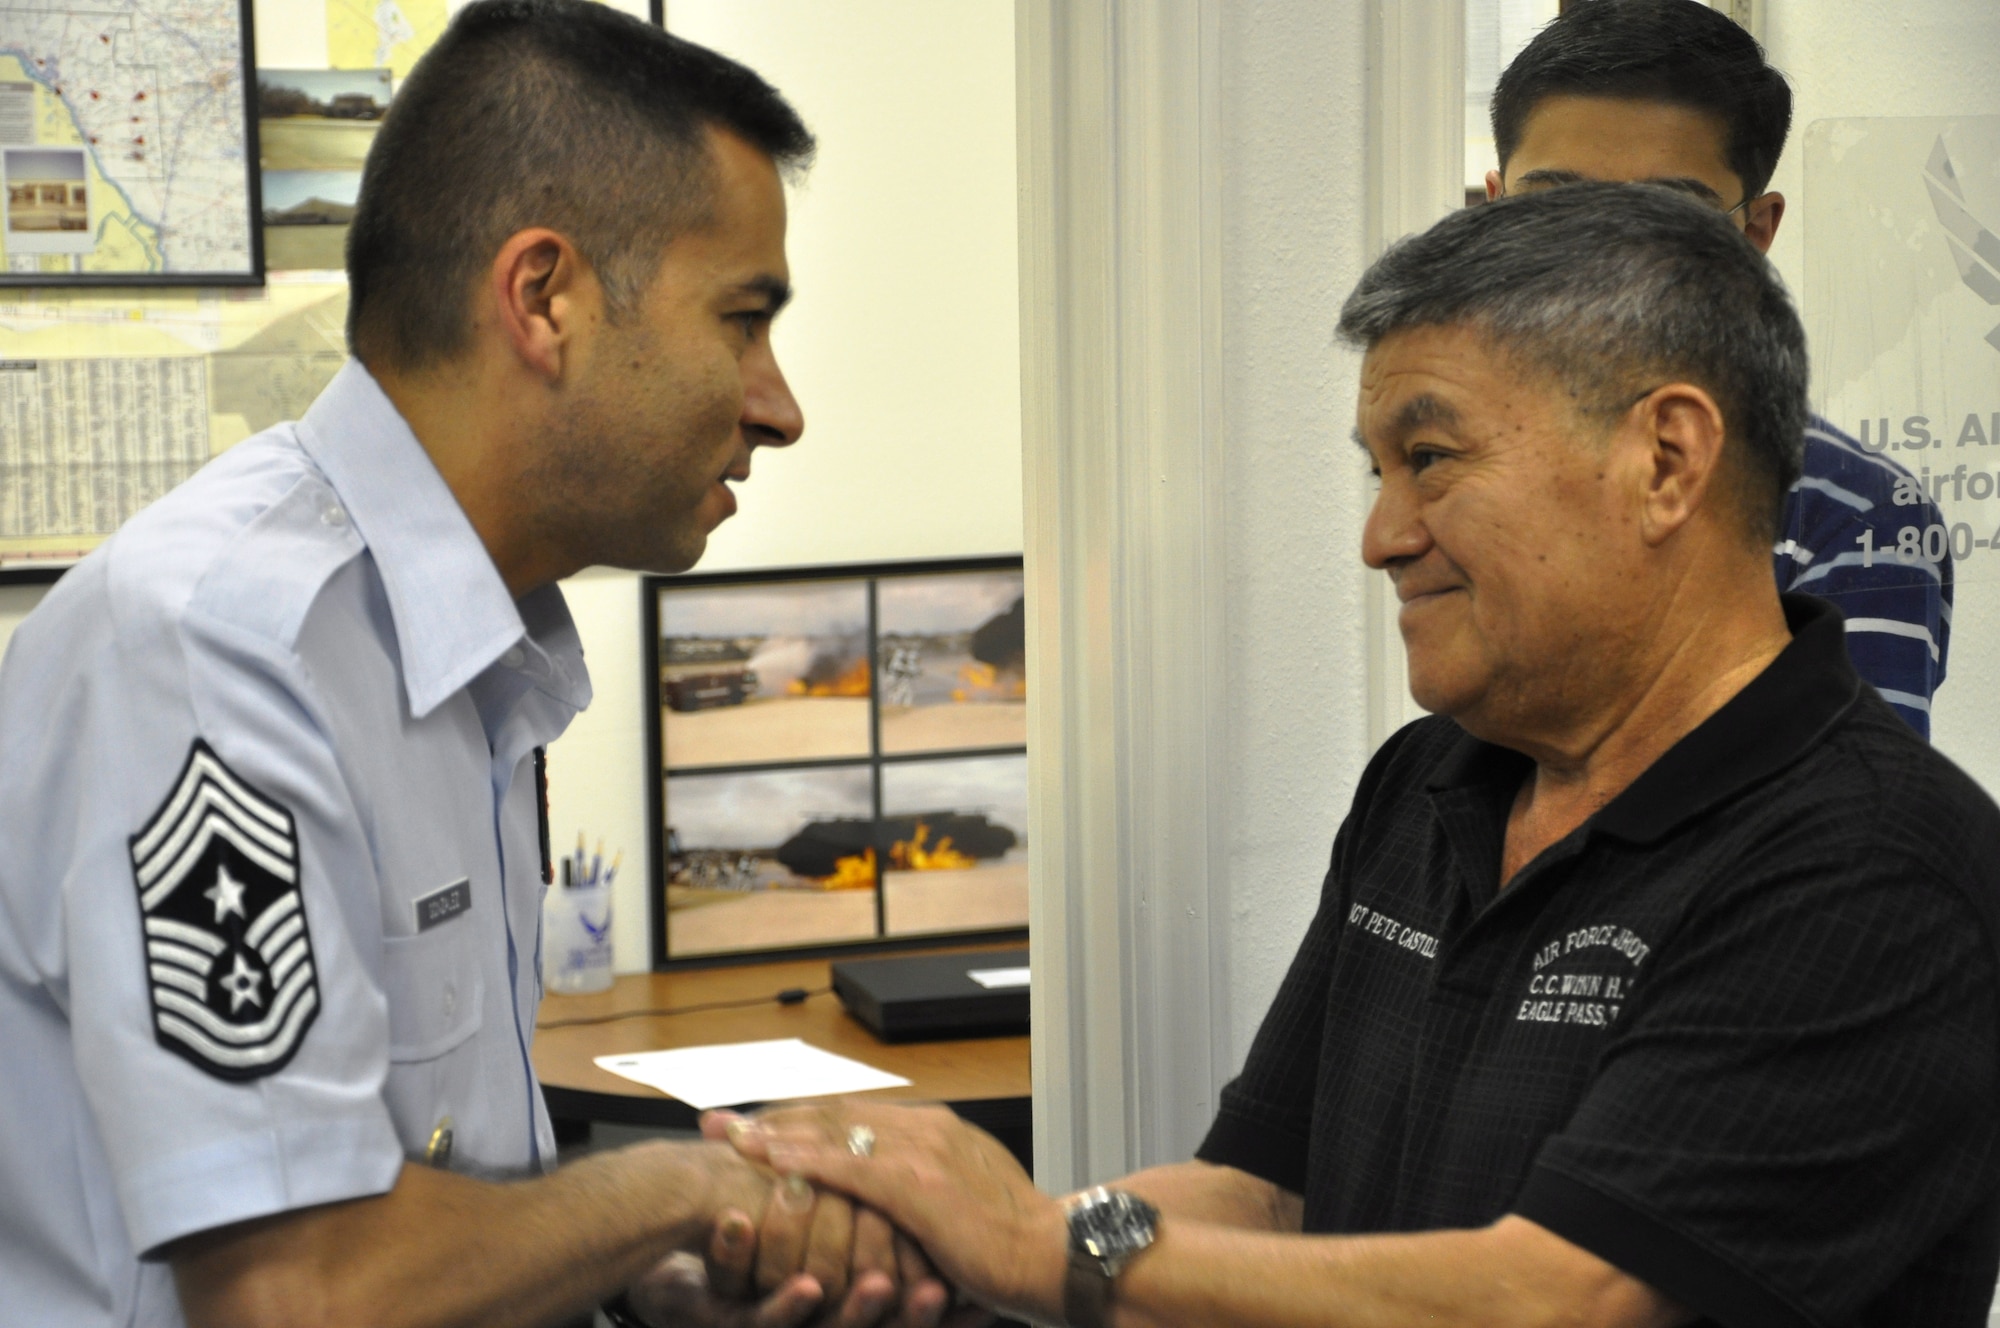 LAUGHLIN AIR FORCE BASE, Texas – Command Chief Master Sgt. Ruben Gonzalez, Air Force Recruiting Service command chief, presents Master Sgt. (ret.) Pete Castillo, who recruited him into the Air Force in 1985, with his coin Aug. 19 in Del Rio. Chief Gonzalez, who is from Eagle Pass and recruited into the Air Force out of Del Rio, chose to begin his world-wide tour of AF recruiting stations with Del Rio. (U.S. Air Force photo by Airman 1st Class Blake Mize)